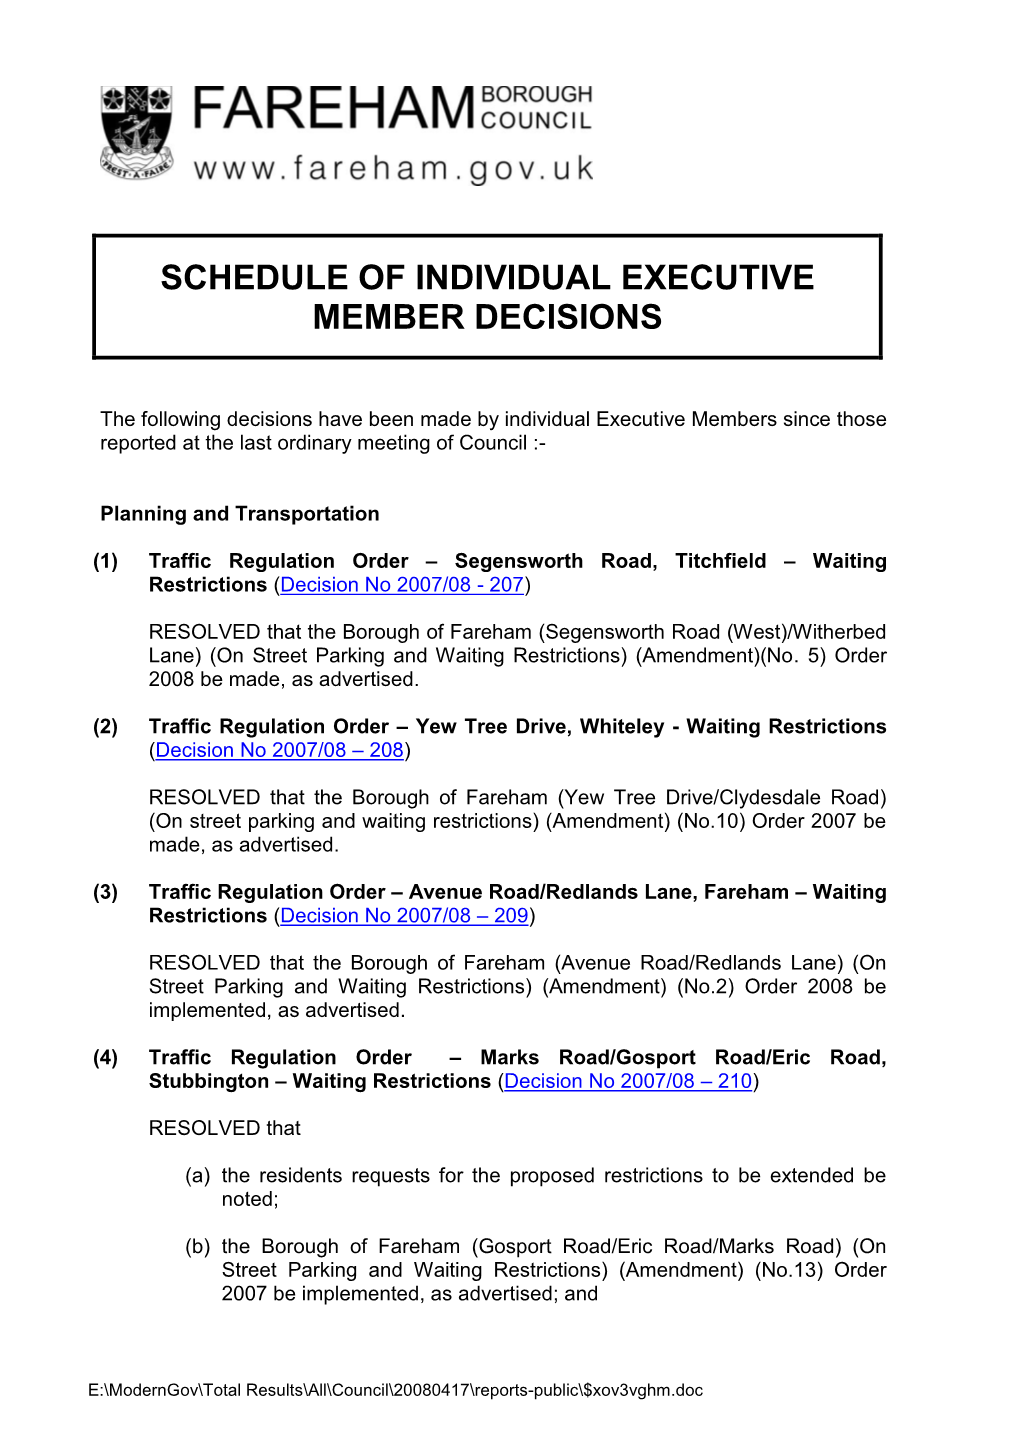 Schedule of Individual Executive Decisions